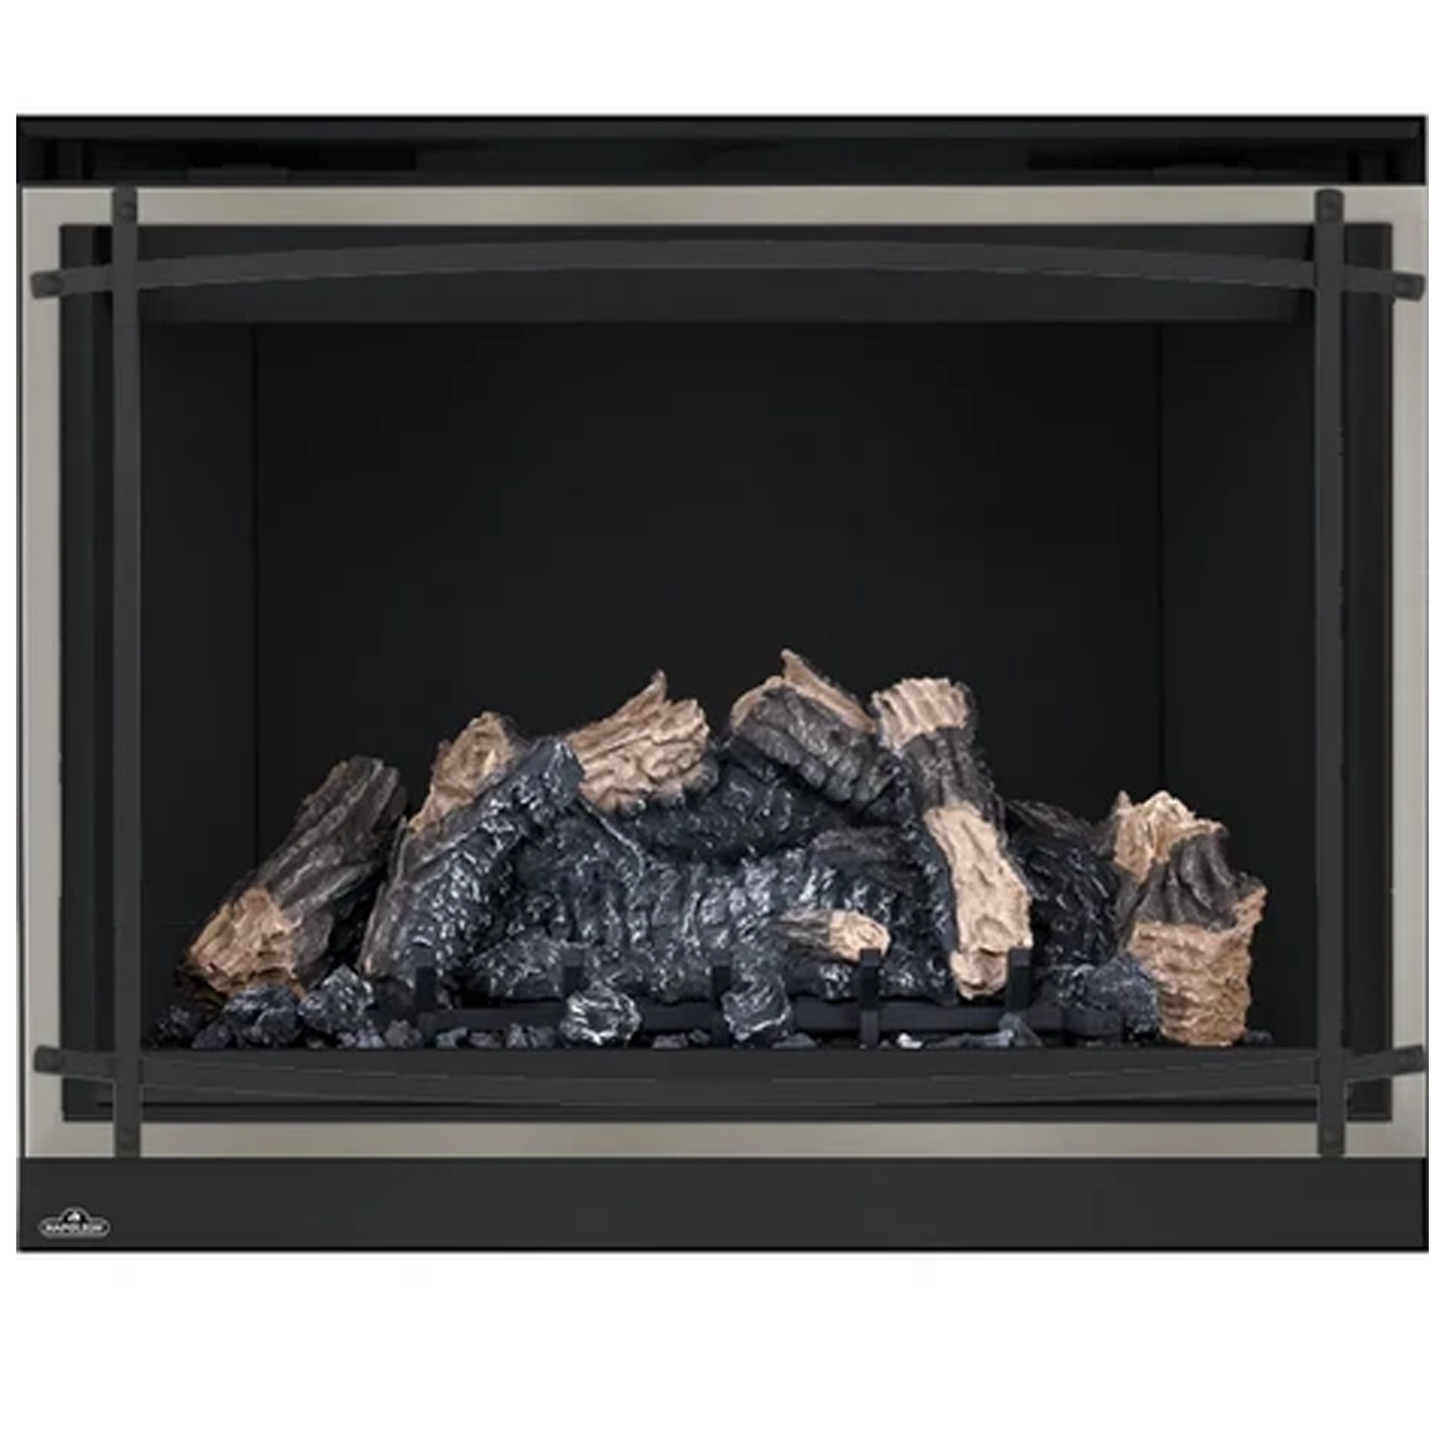 Napoleon High Definition 46 Direct Vent Gas Fireplace | HD46NT-2